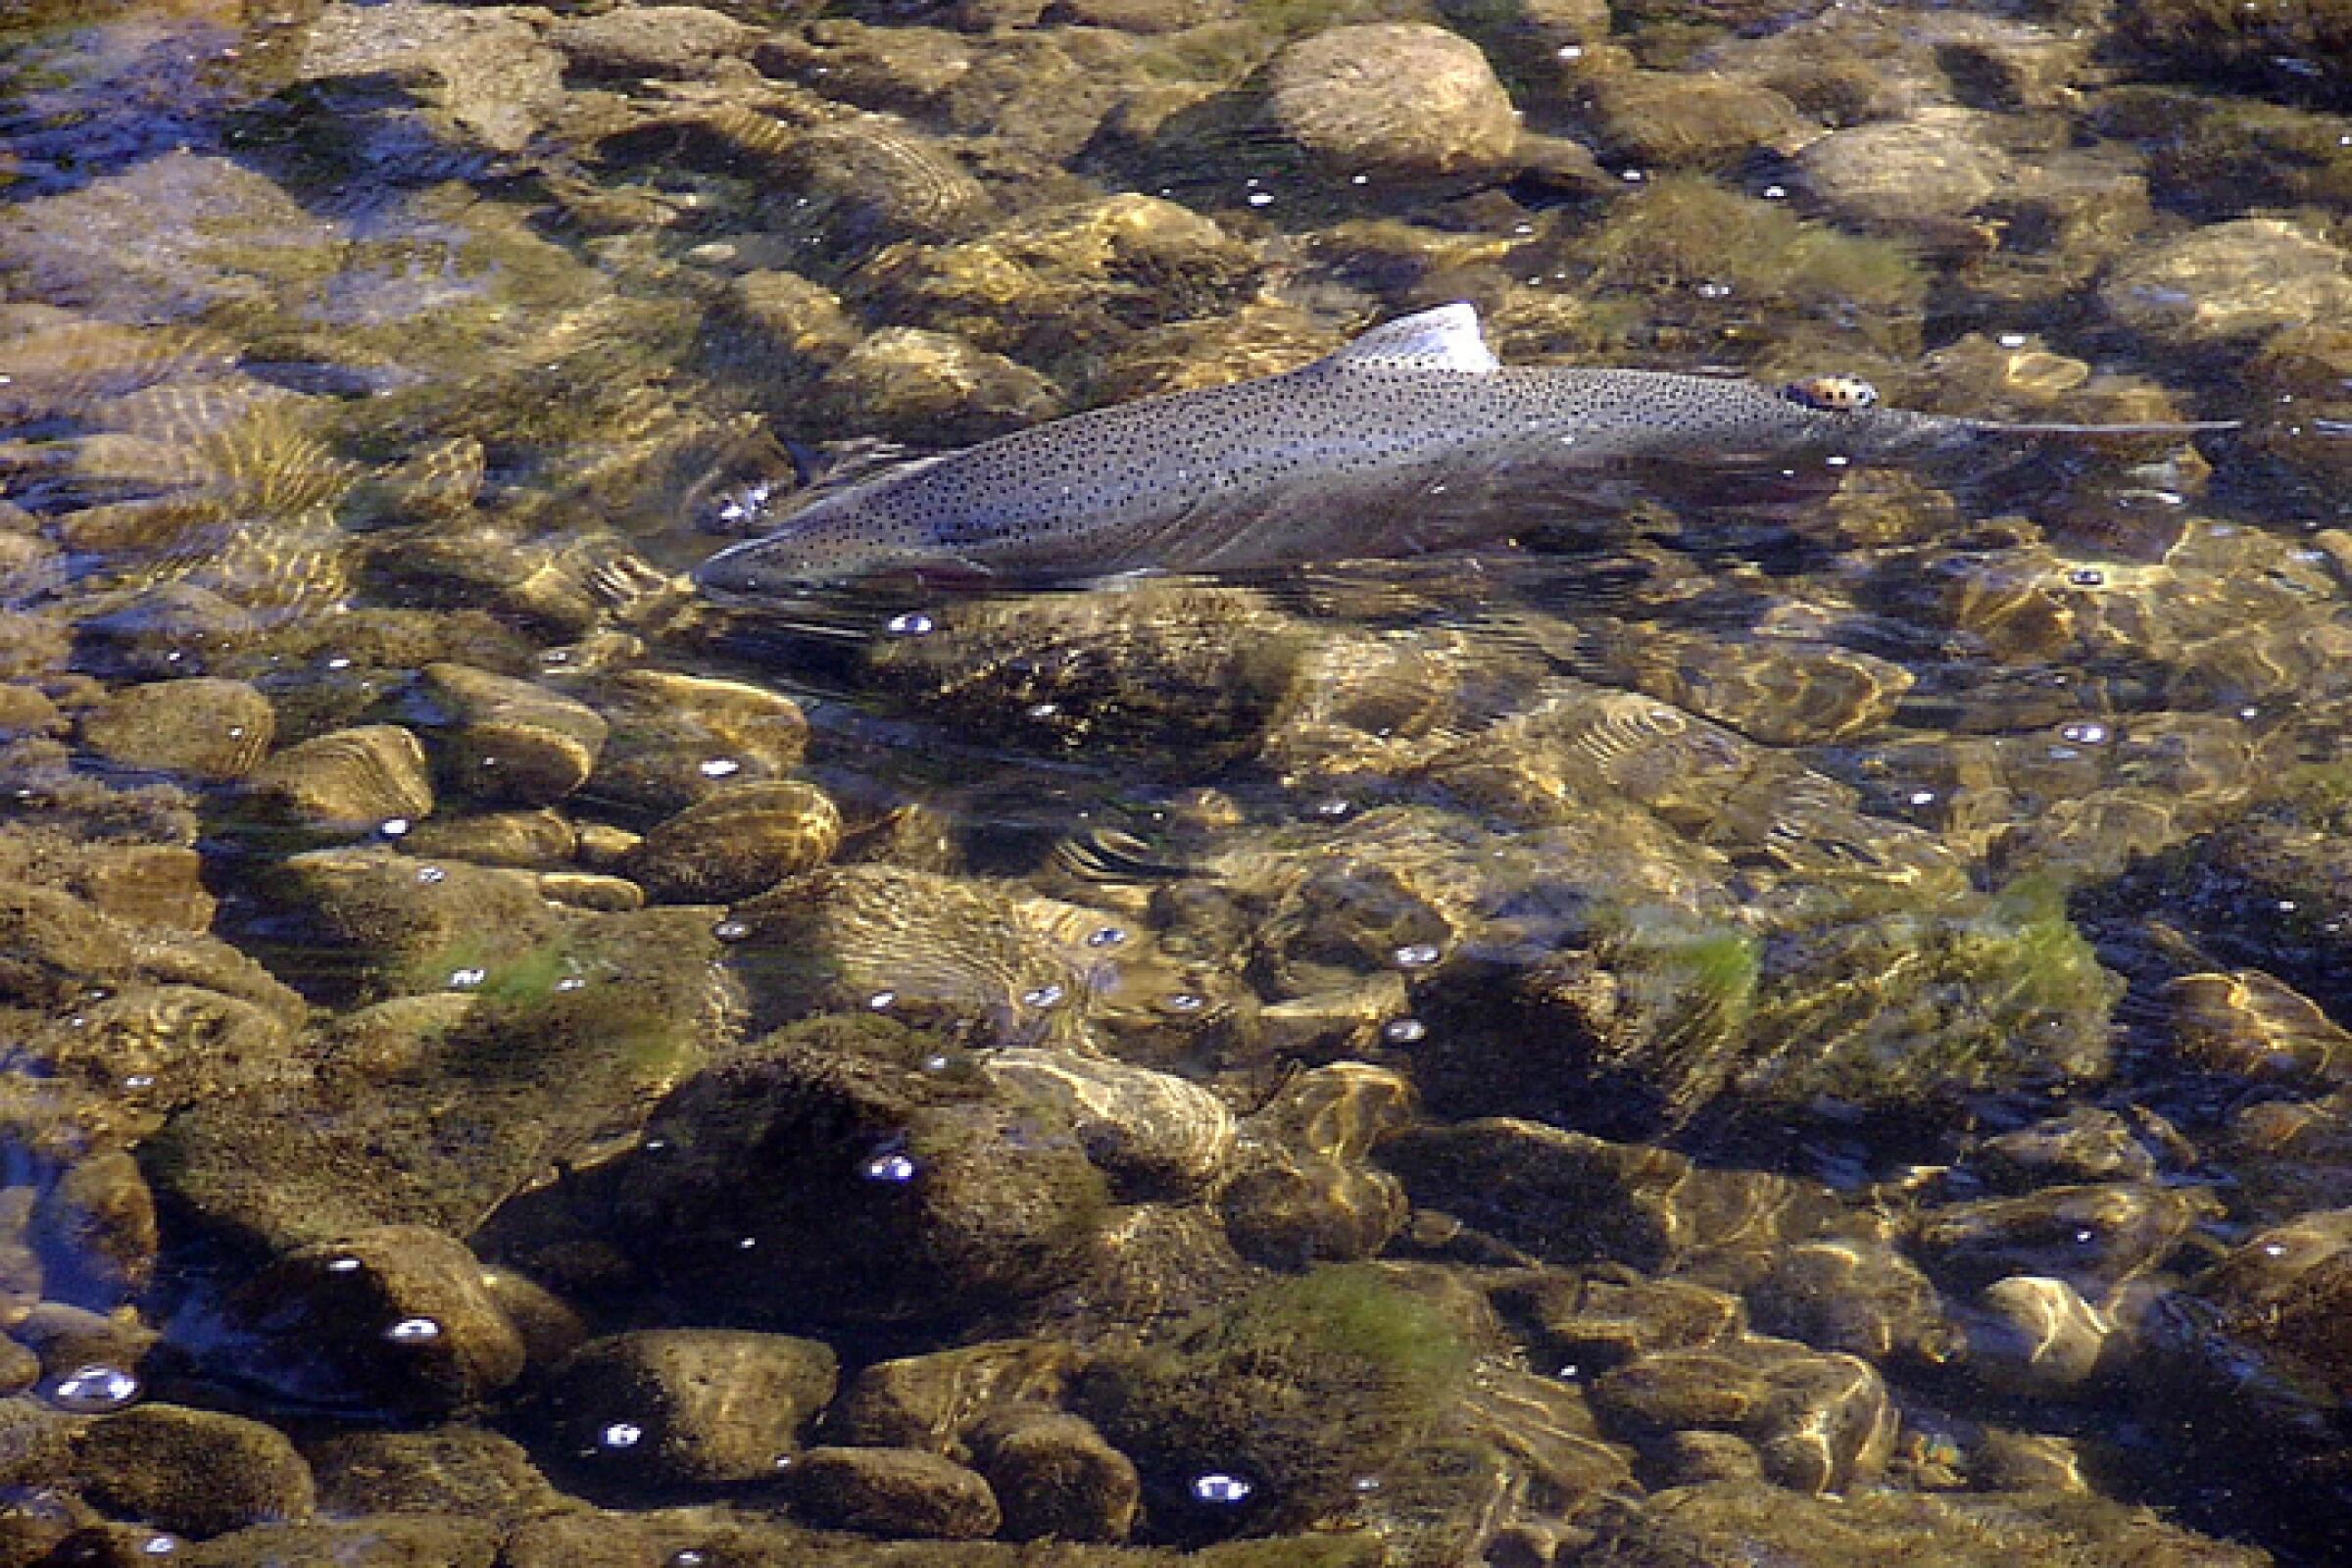 A Southern California steelhead trout swims in shallow water with a rocky bottom